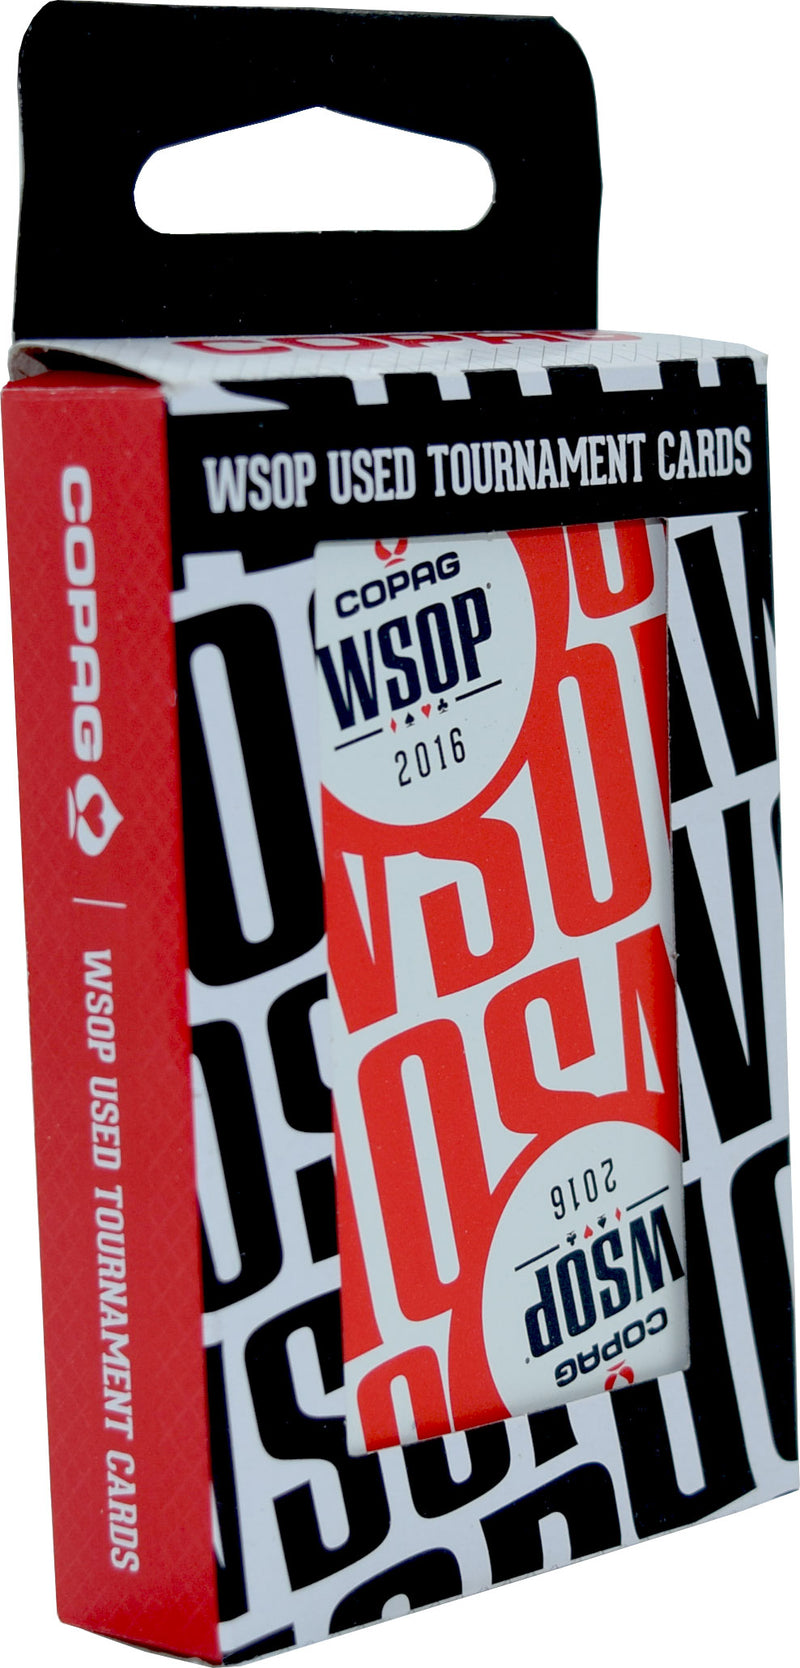 Authentic Deck Dealt at WSOP Final Table Red Used Copag Plastic Playing Cards Bridge Standard Index